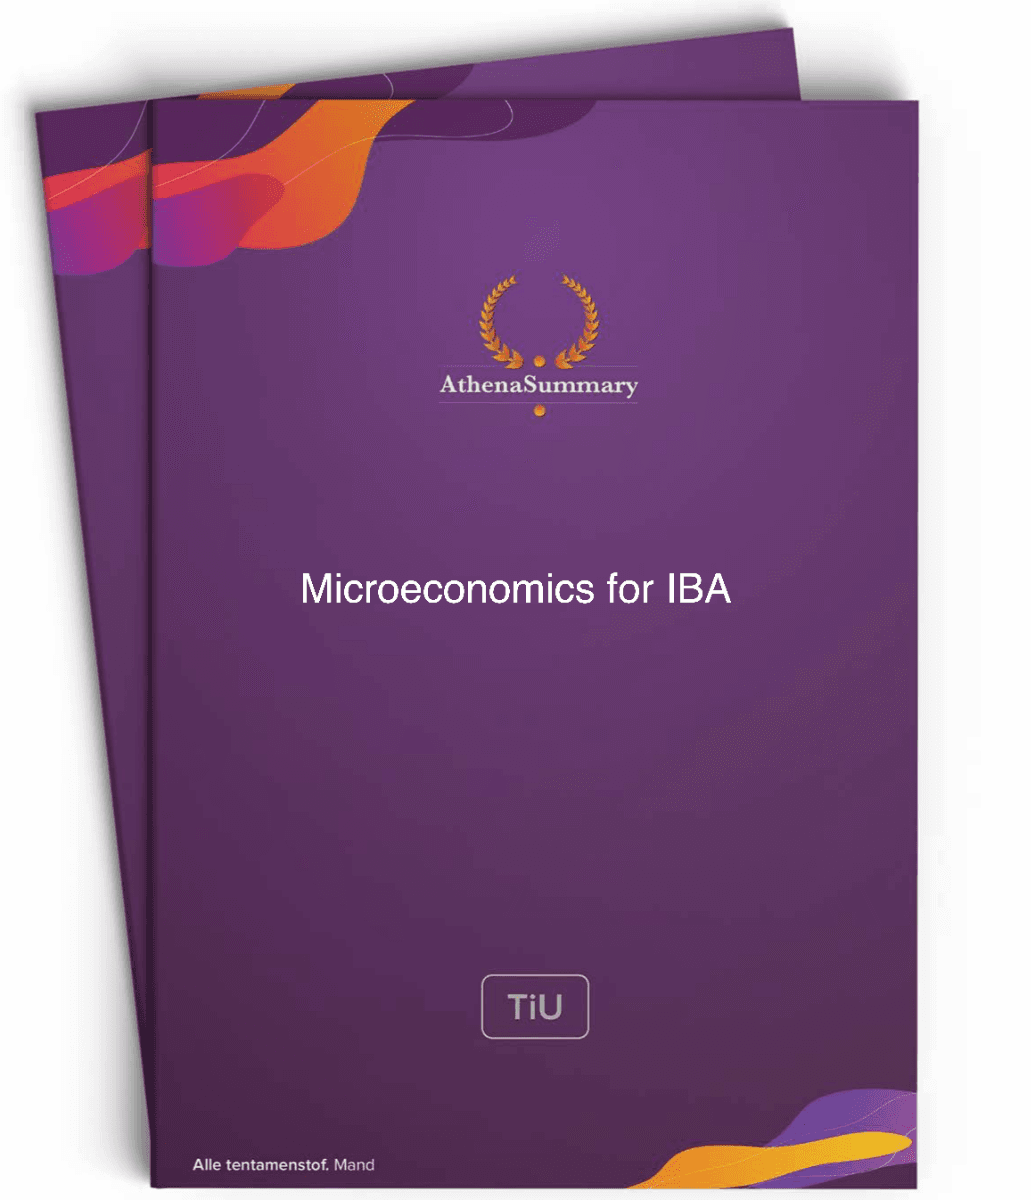 Literature and Lecture Summary: Microeconomics for IBA